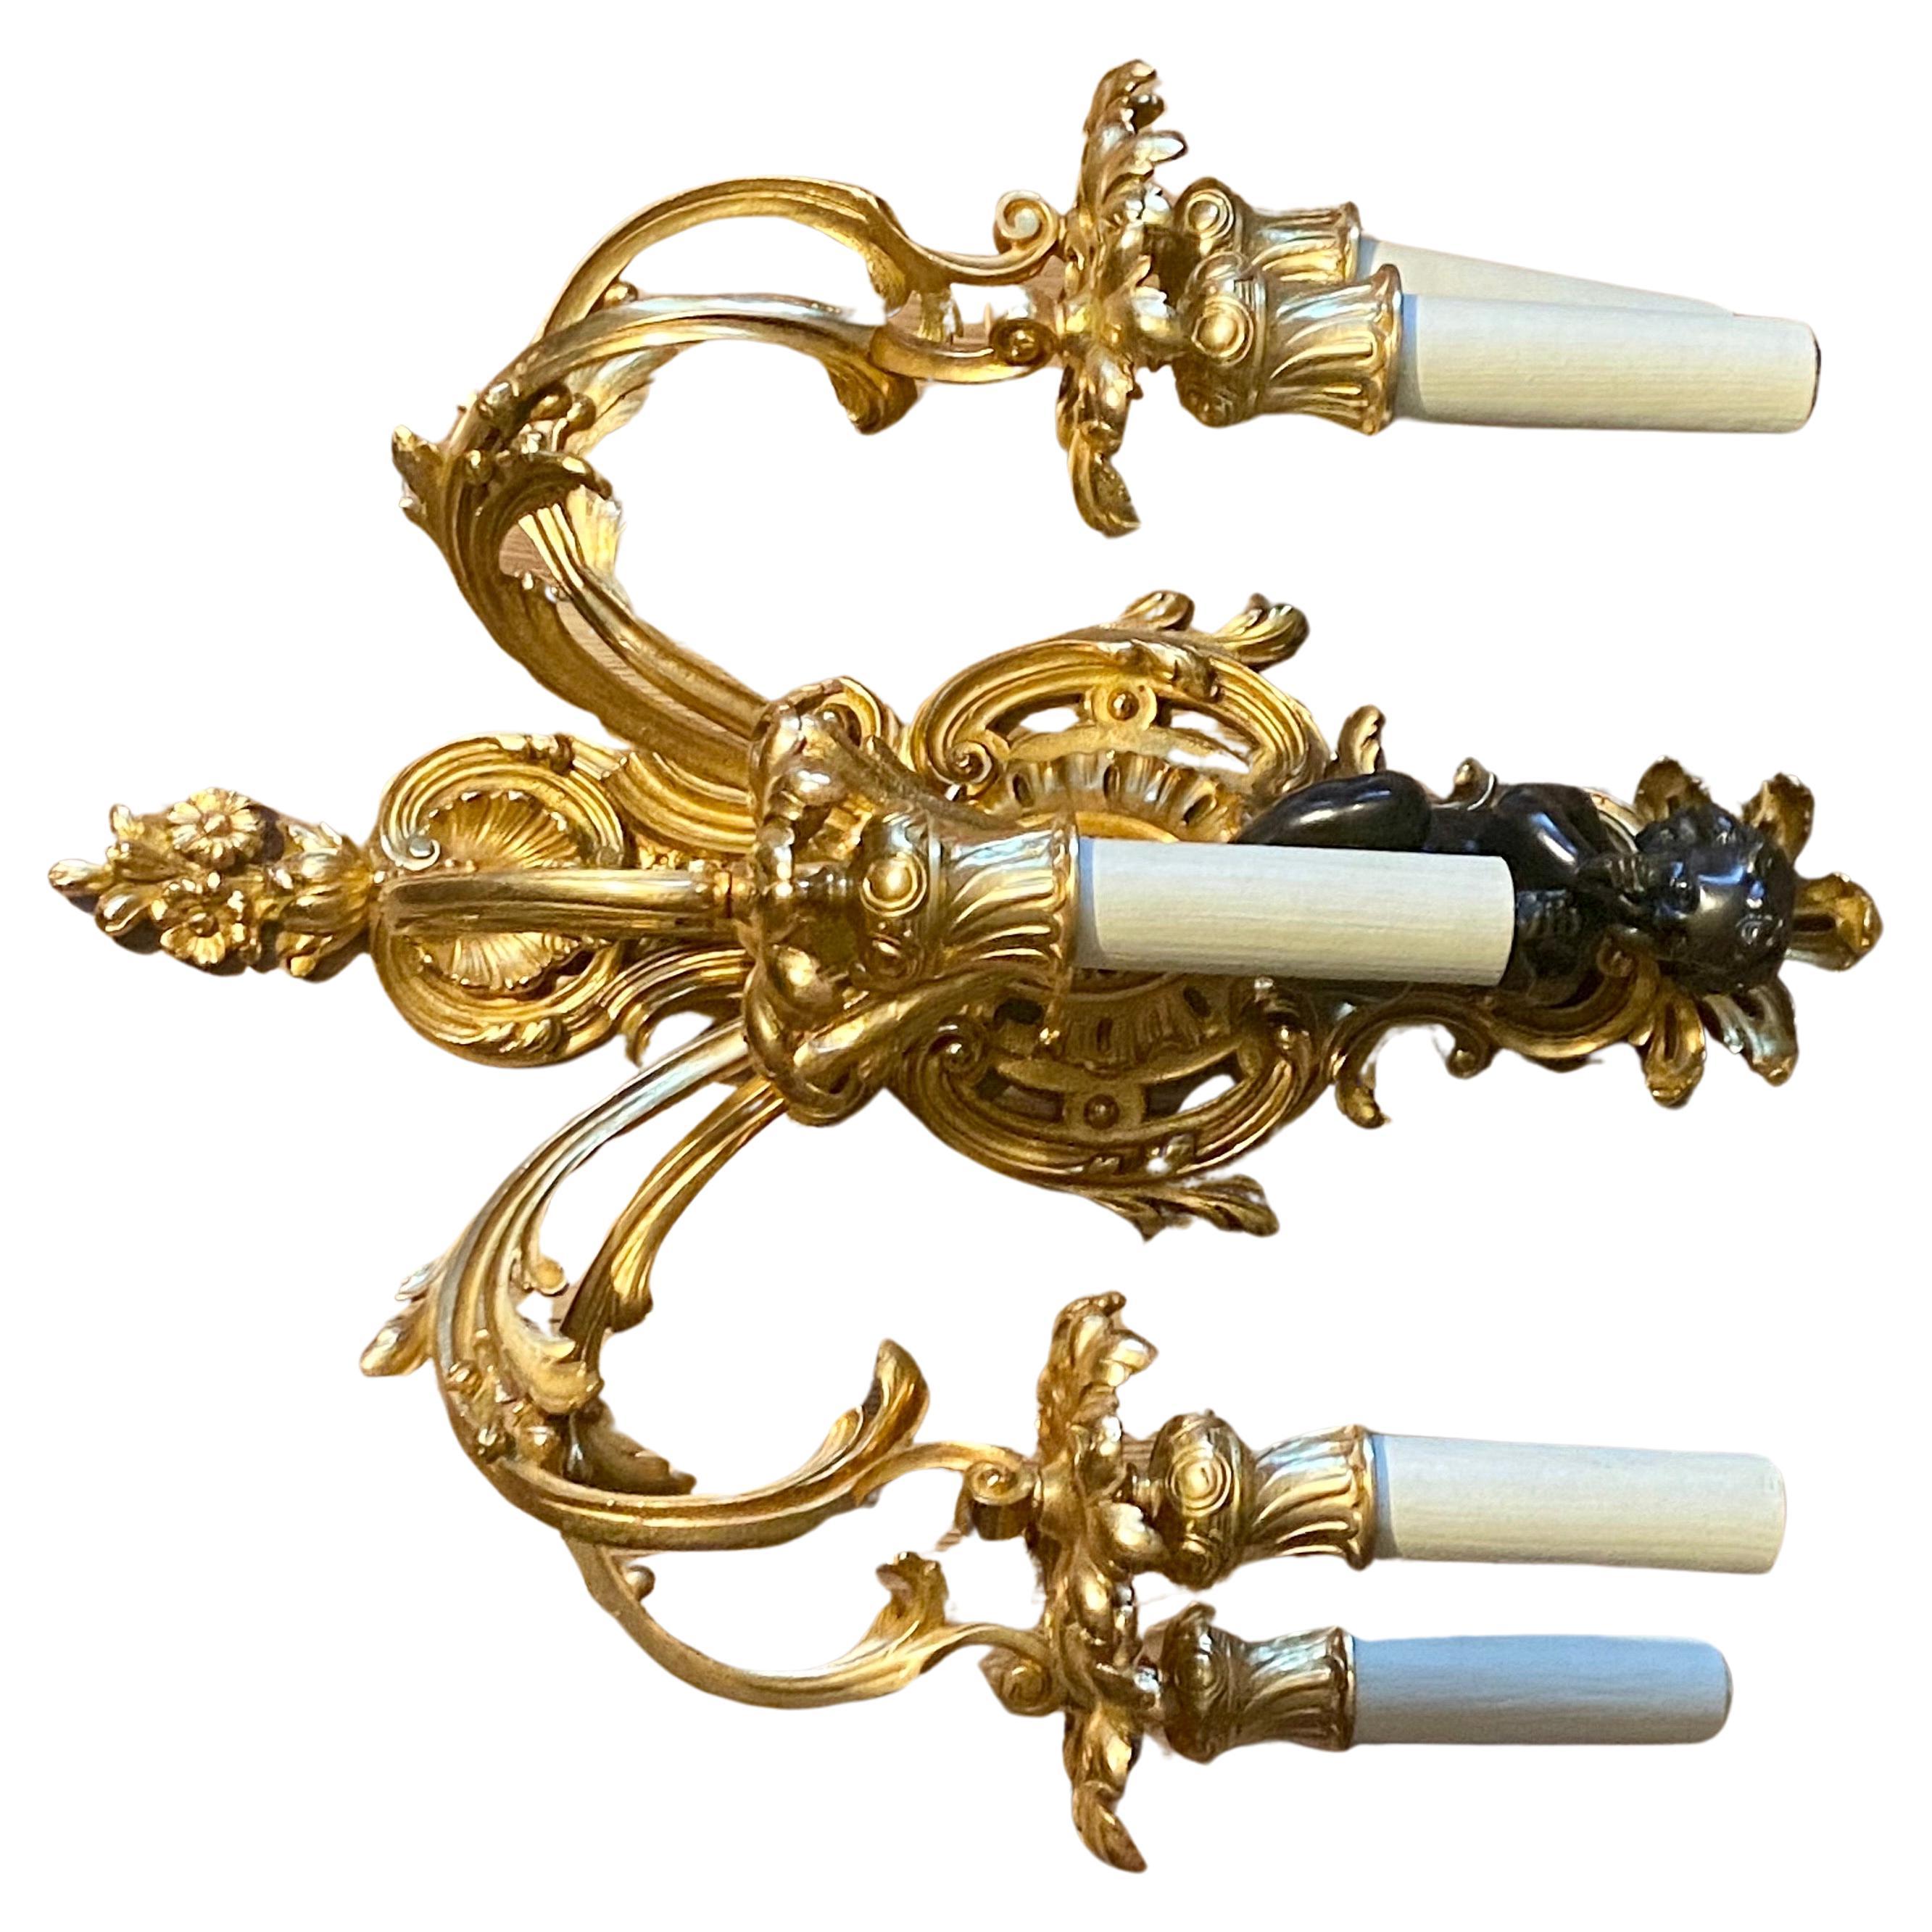 A Large Pair of 19th Century French Gilt Bronze Dore Cherub Wall Sconces For Sale 5